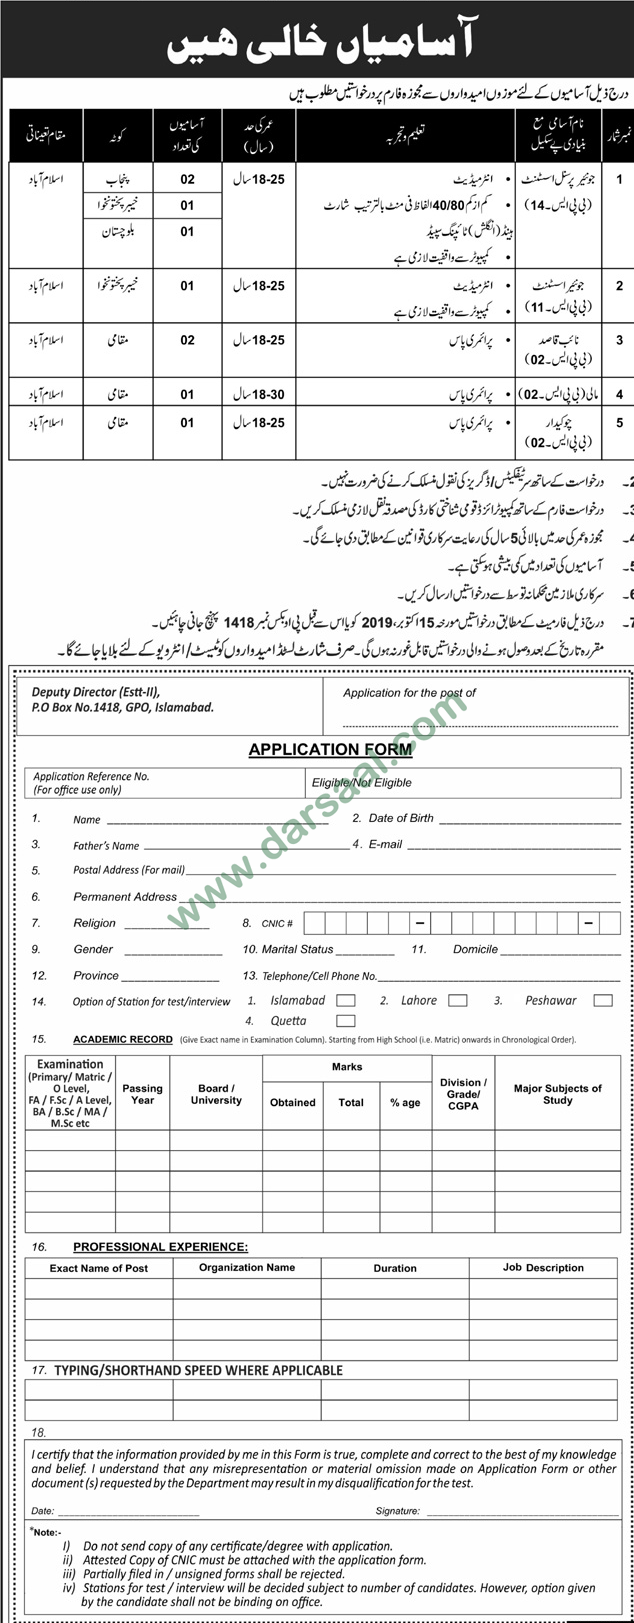 Junior Assistant Jobs in Government Departments in Lahore - Sep 29, 2019